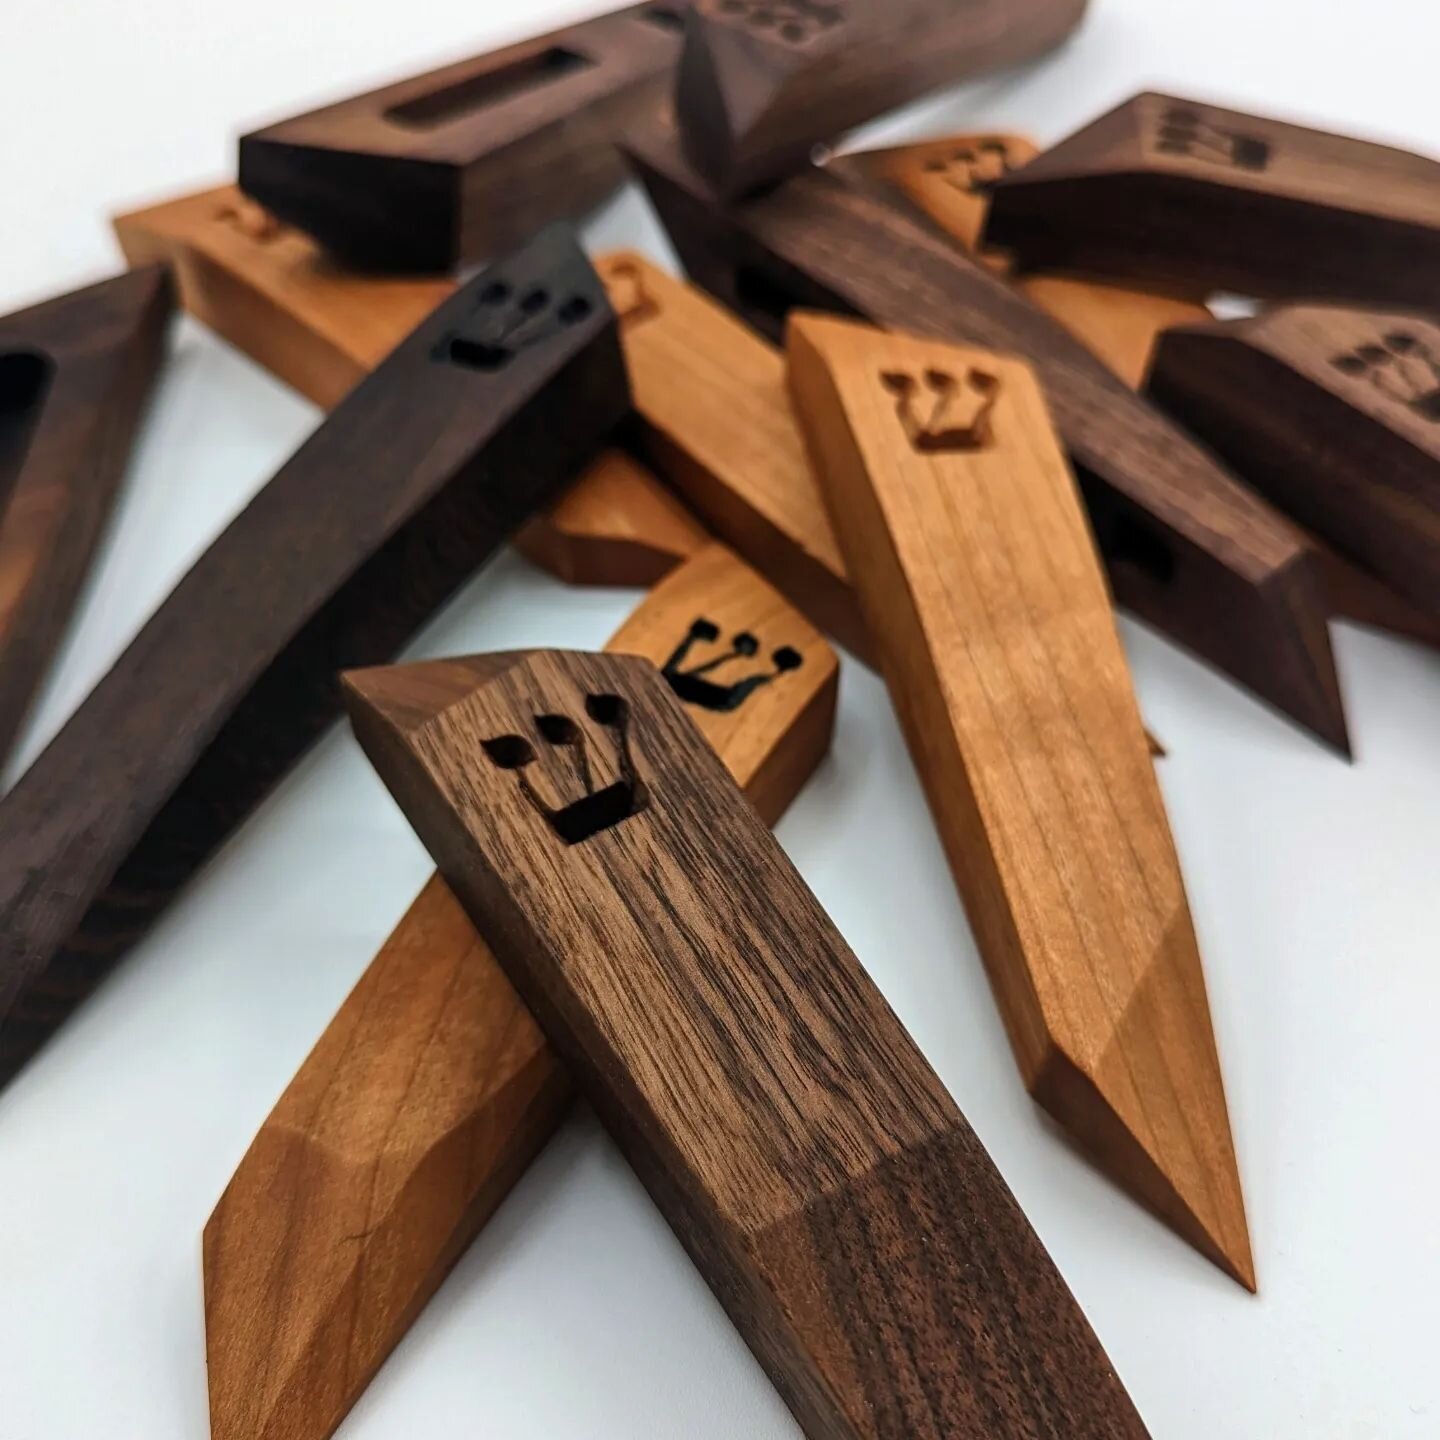 Very proud of our new wooden mezuzahs. Made from solid cherry or walnut, these mezzuzah holders (klaf/scroll not included) will add a touch of warmth and natural beauty to your doorway.

Each mezuzah holder includes a cavity 100mm long x 11mm wide x 